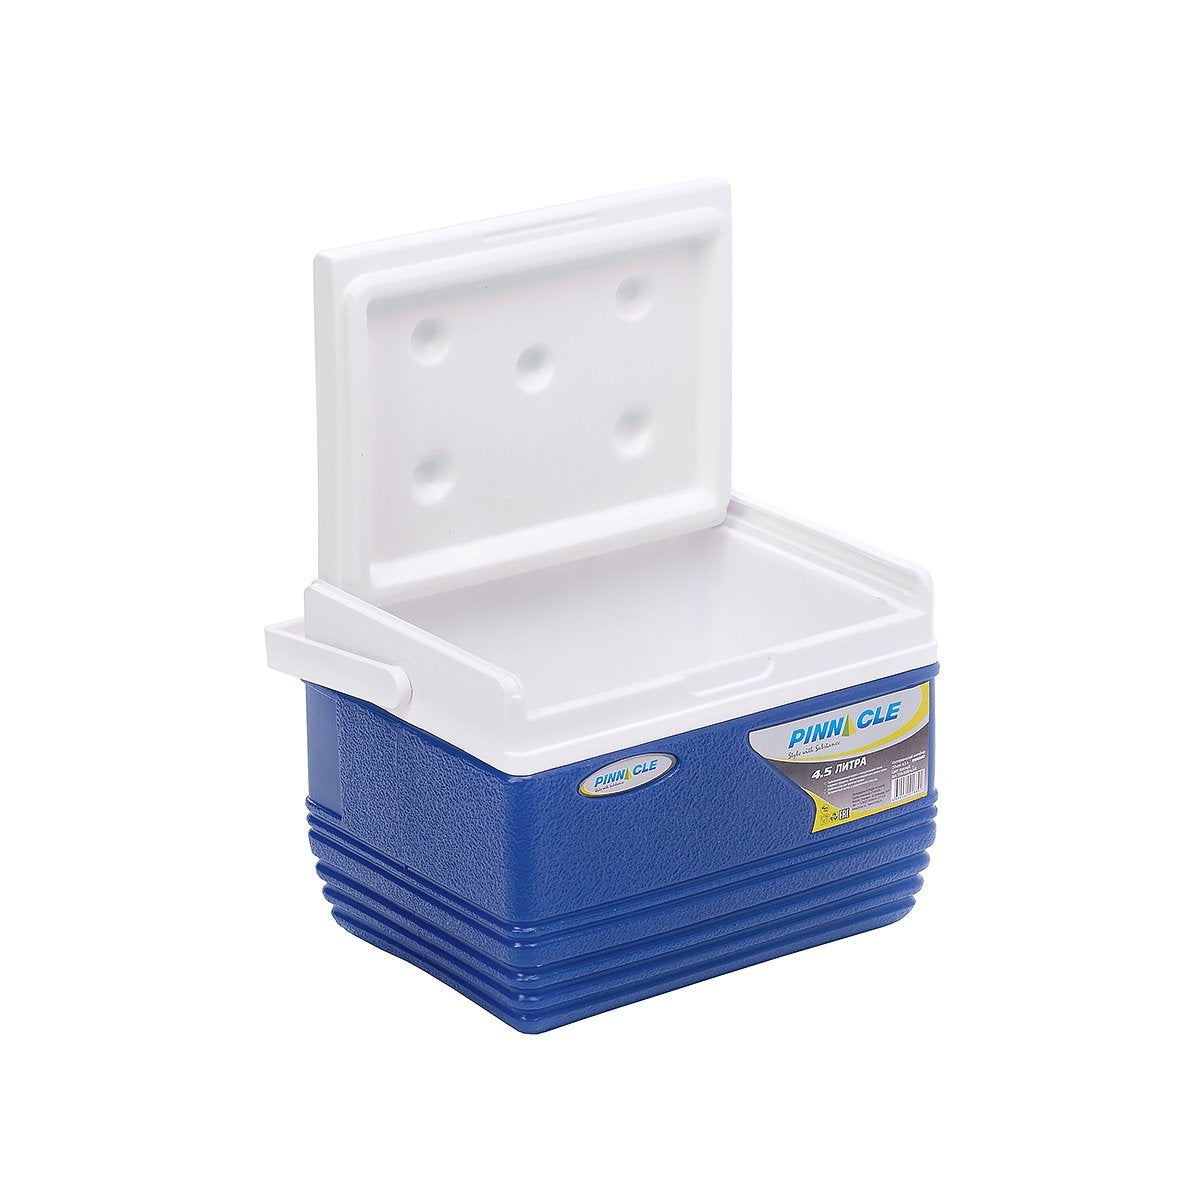 Eskimo Portable Hard-Sided Ice Chest for Camping, 4 qt, Navy Blue with a lid widely open